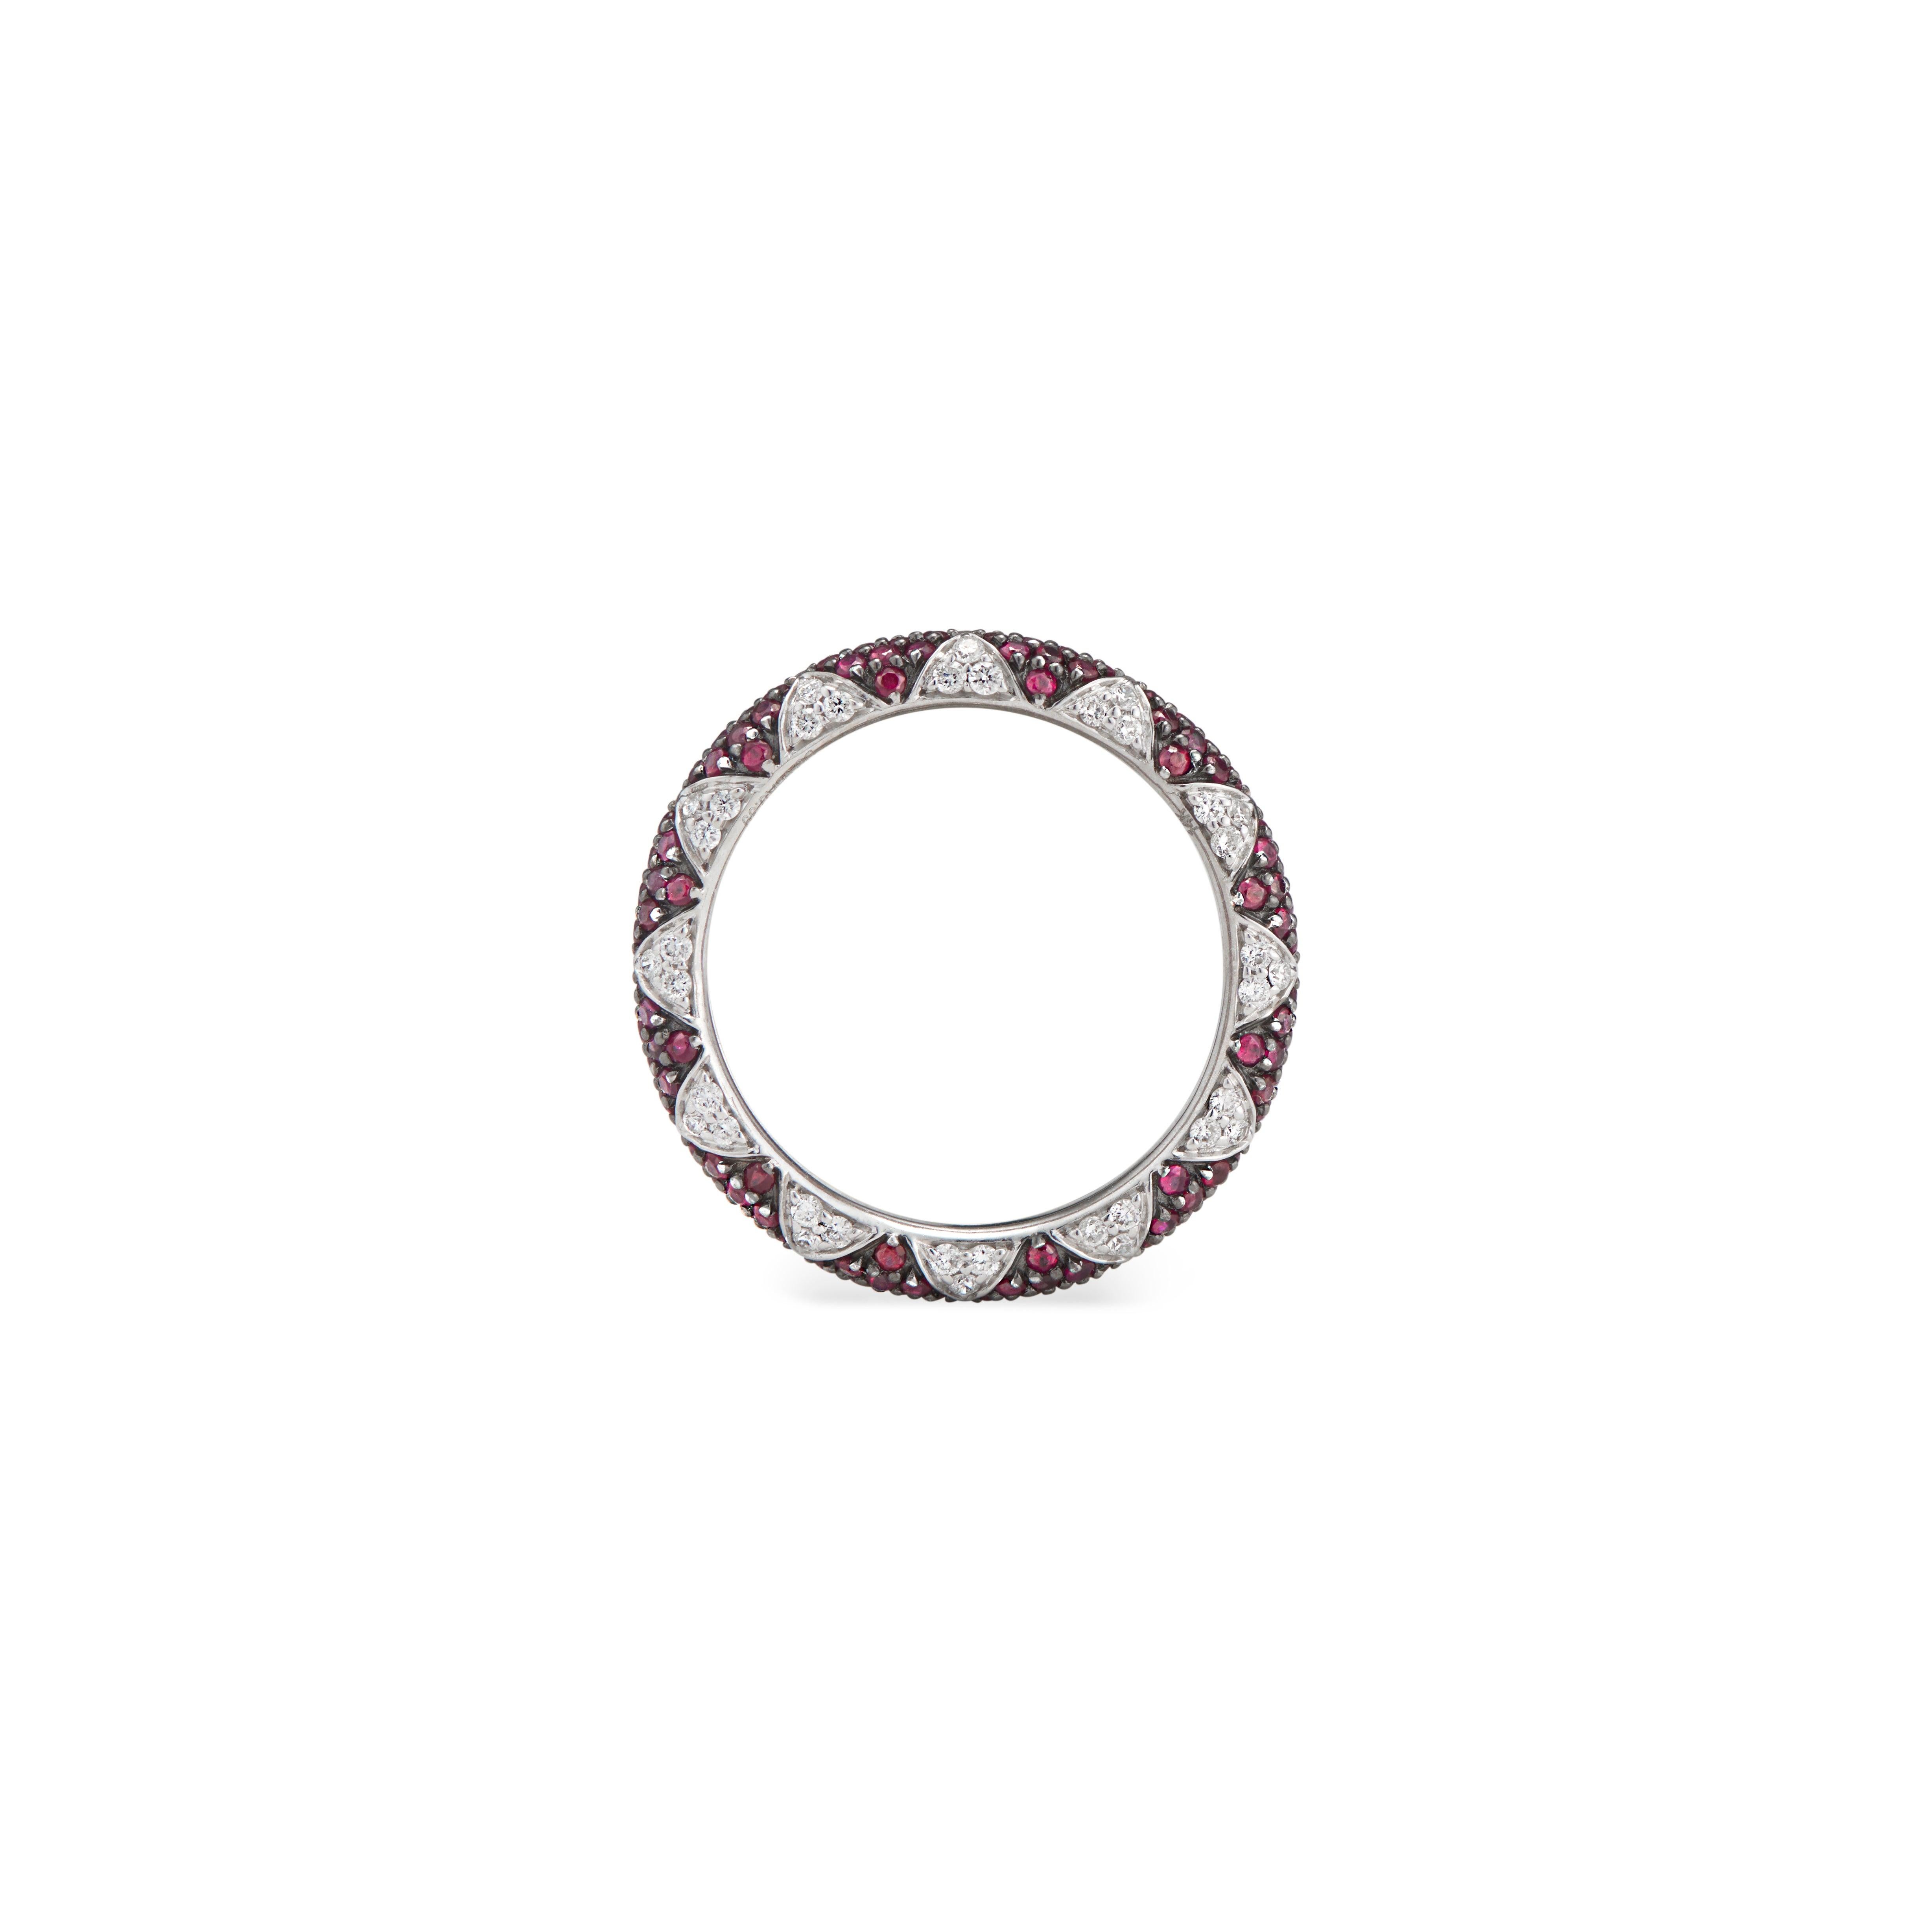 Lotus Eternity Band Ring with White Diamond Petals and Pave Set Rubies 2